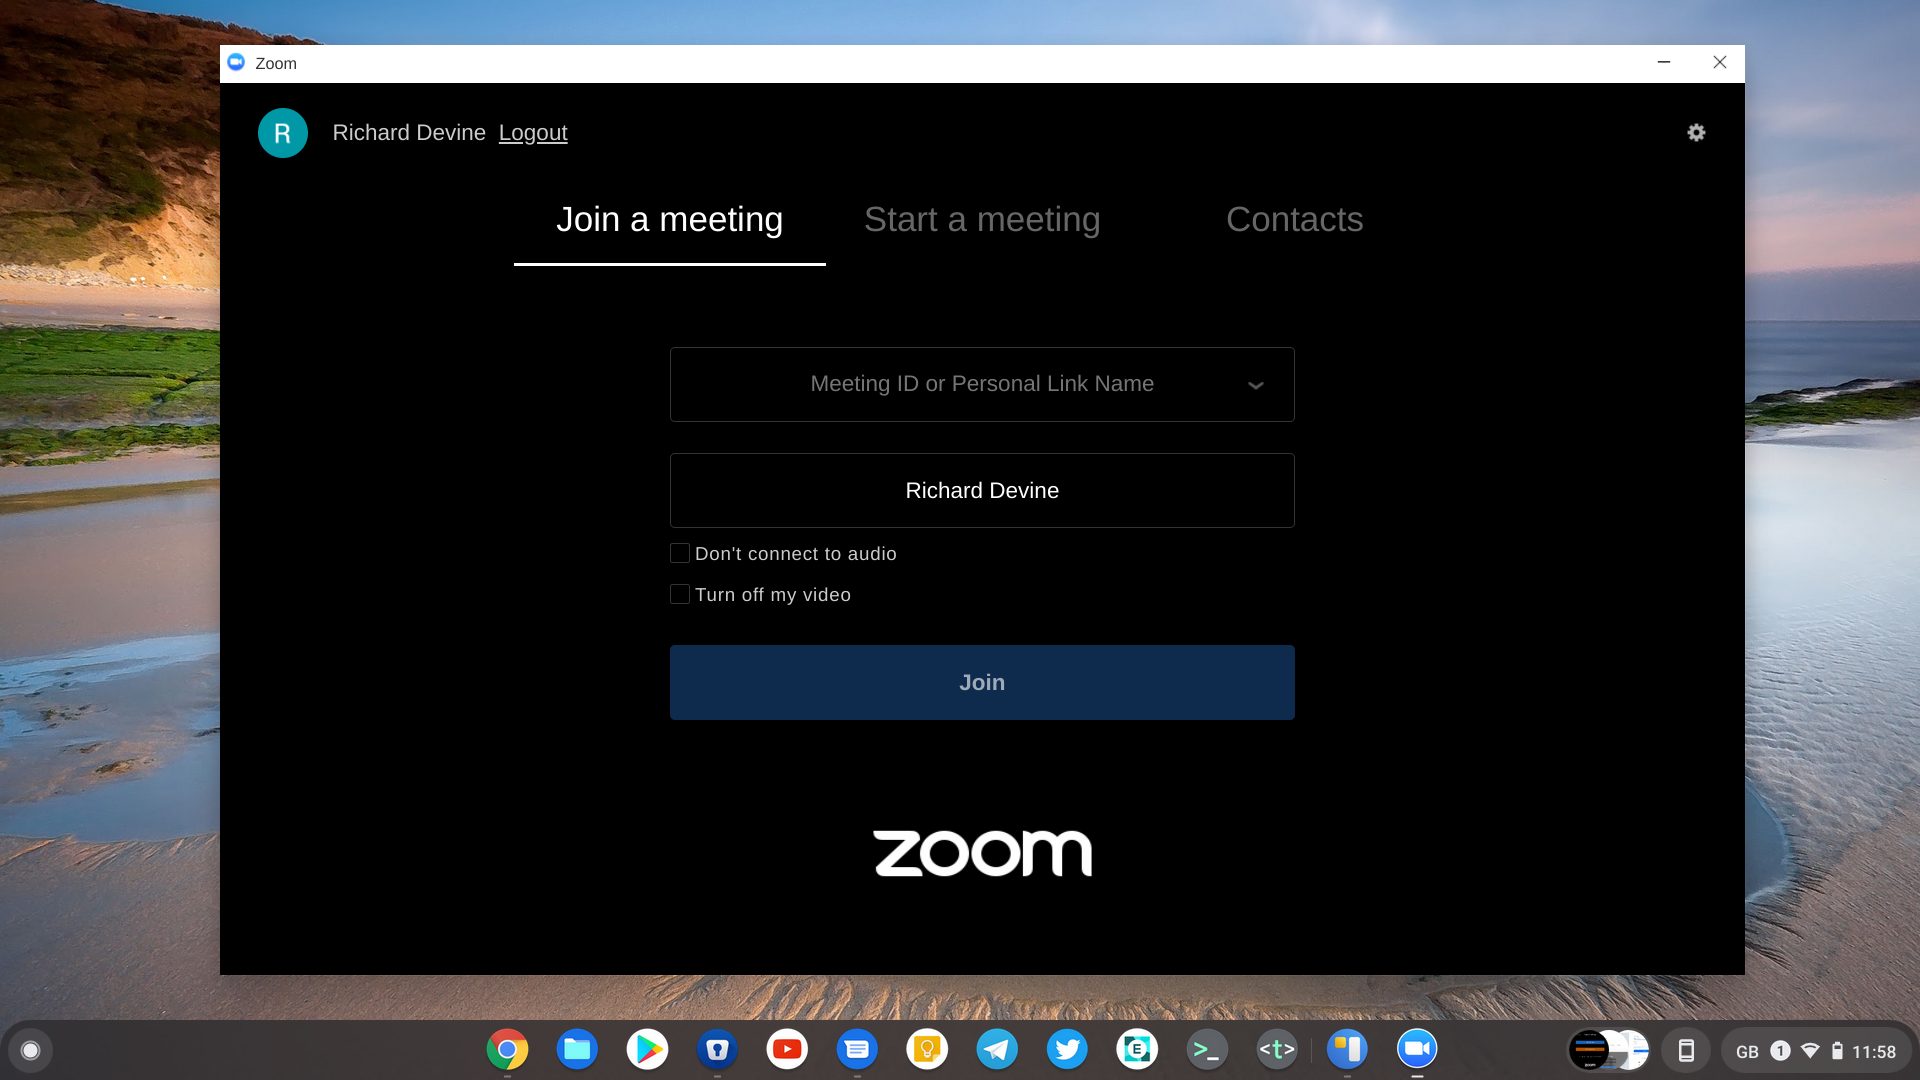 can you download zoom on chromebook